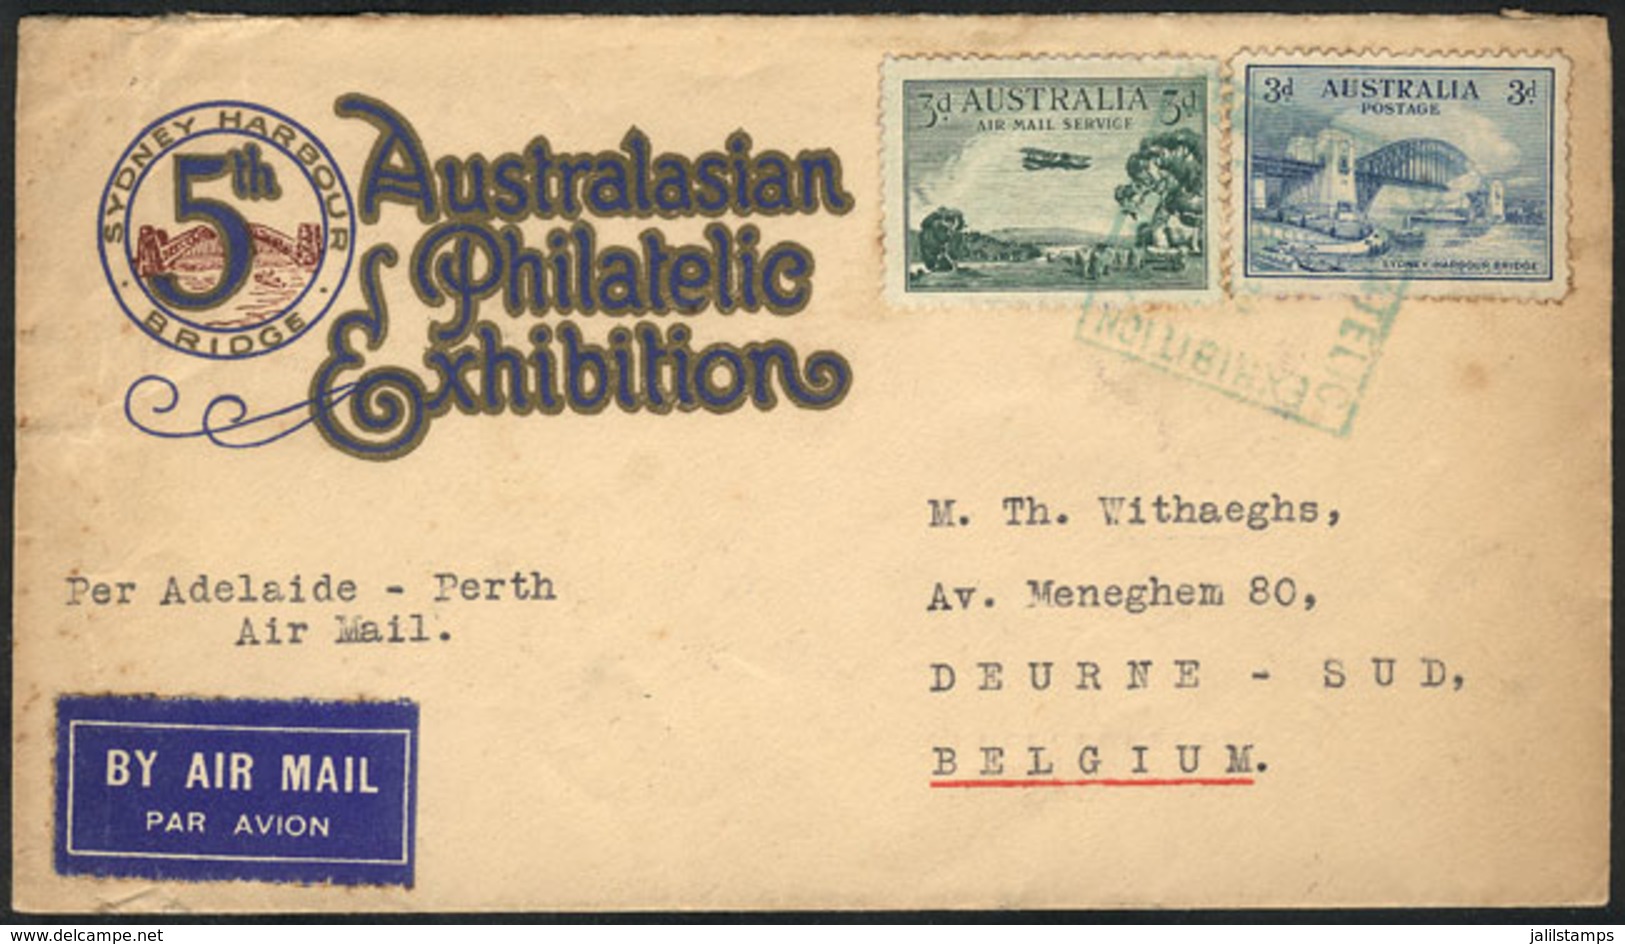 AUSTRALIA: Cover Franked With 6p., Sent In April 1932 Via "ADELAIDE - PERTH" Airmail To Belgium, With Deurne Arrival Bac - Covers & Documents